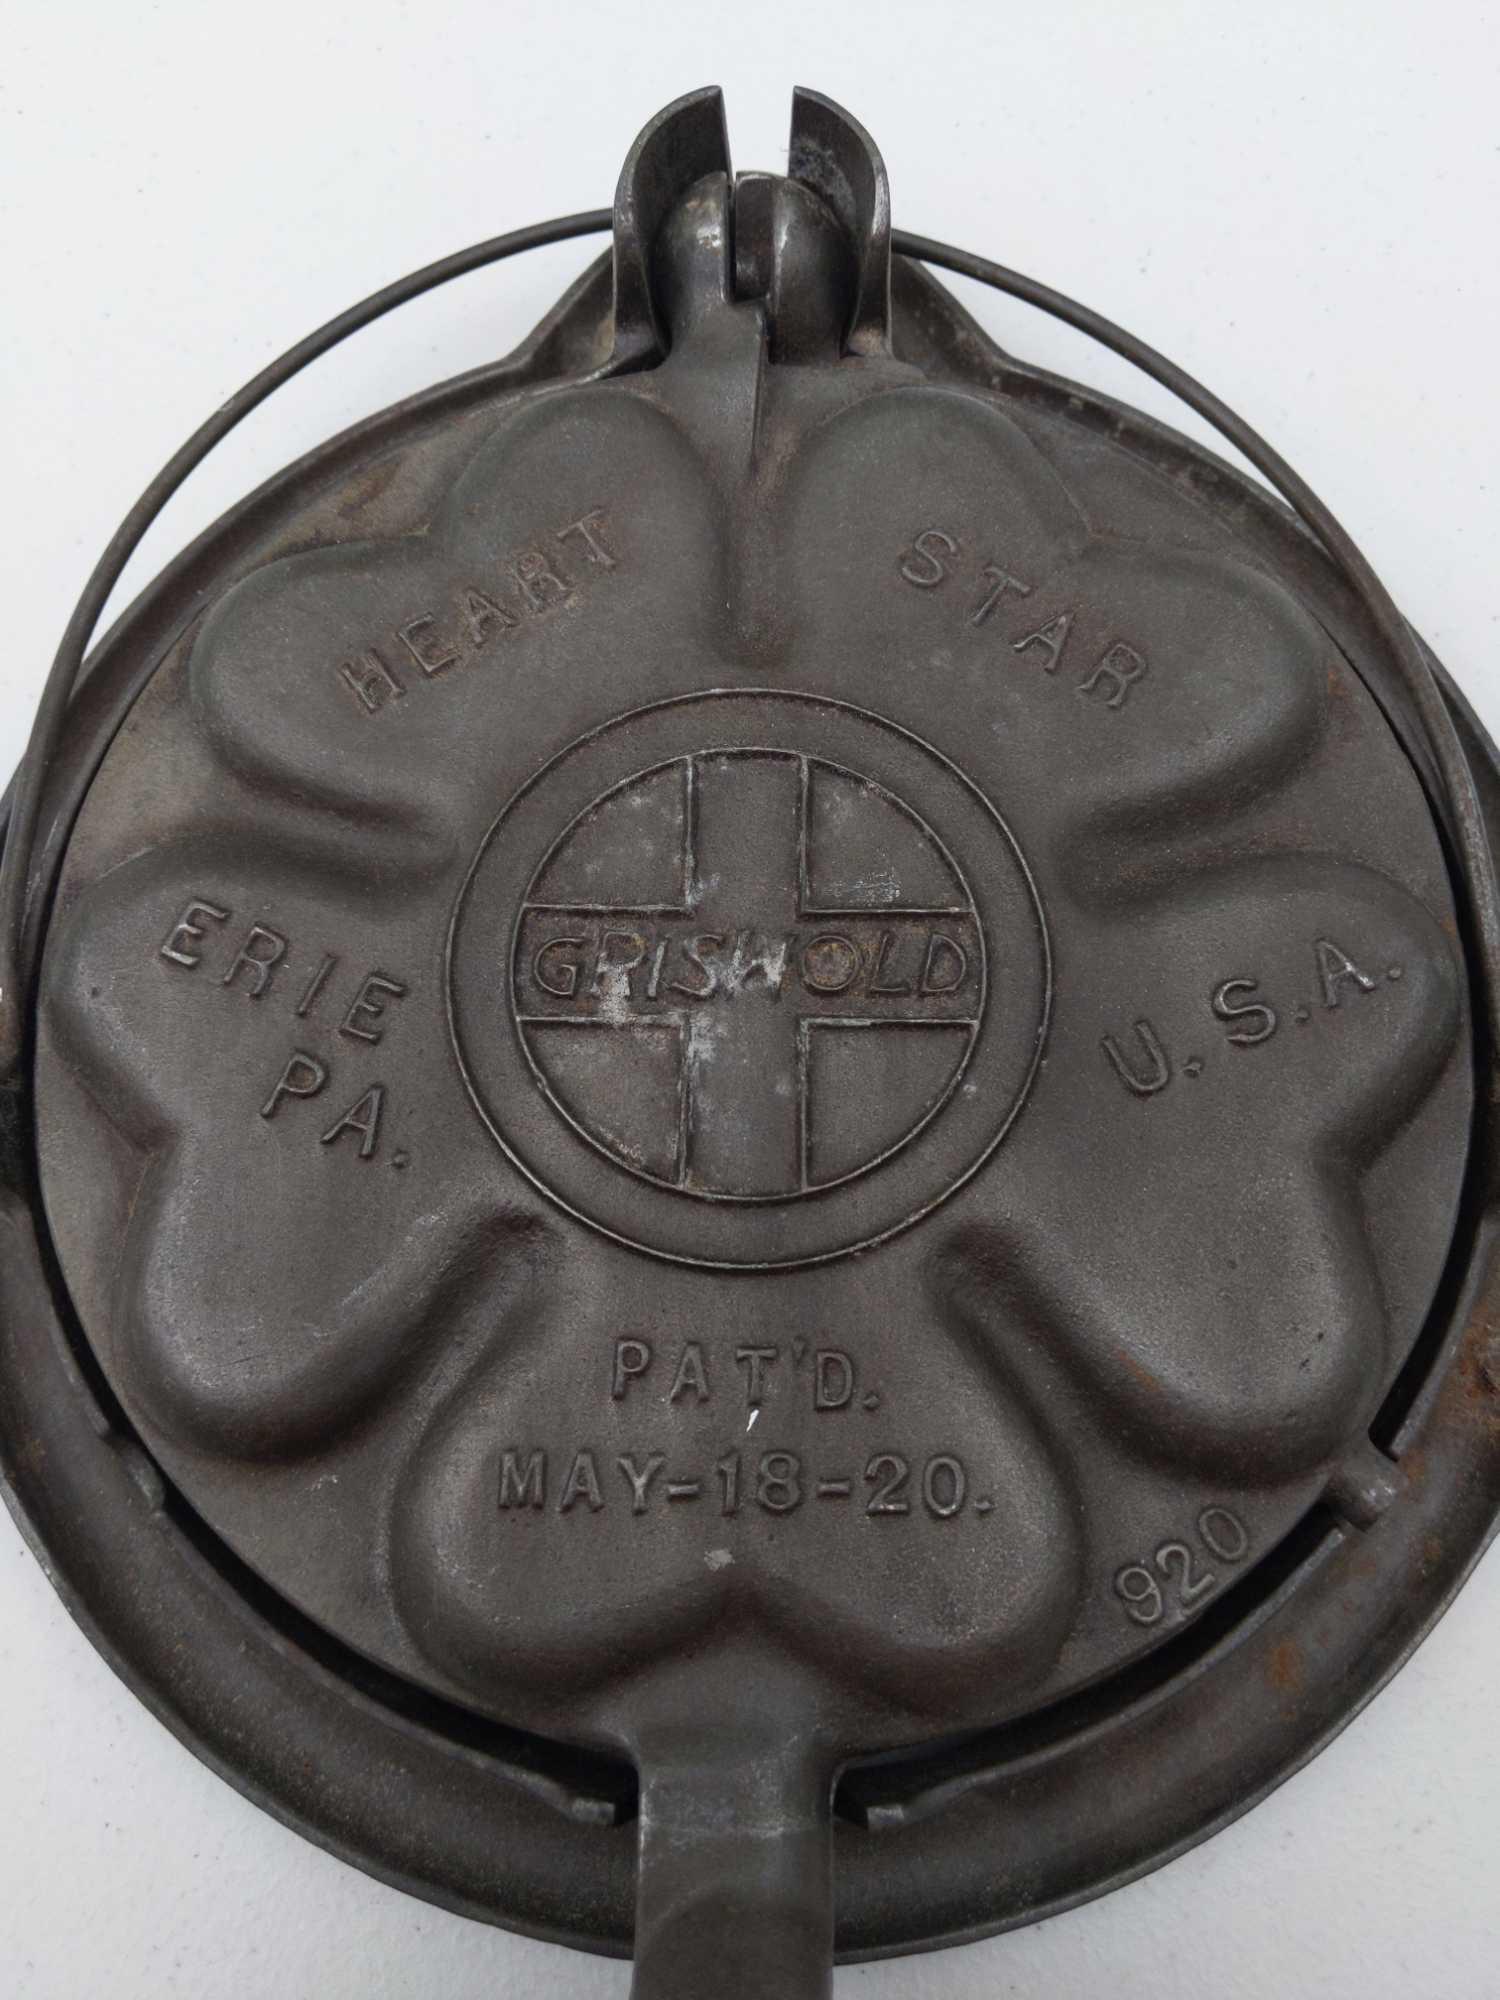 Griswold Heart & Star No. 18 Erie, PA USA Pat'd May - 18 - 20 (919, 920, 913A) Waffle Iron